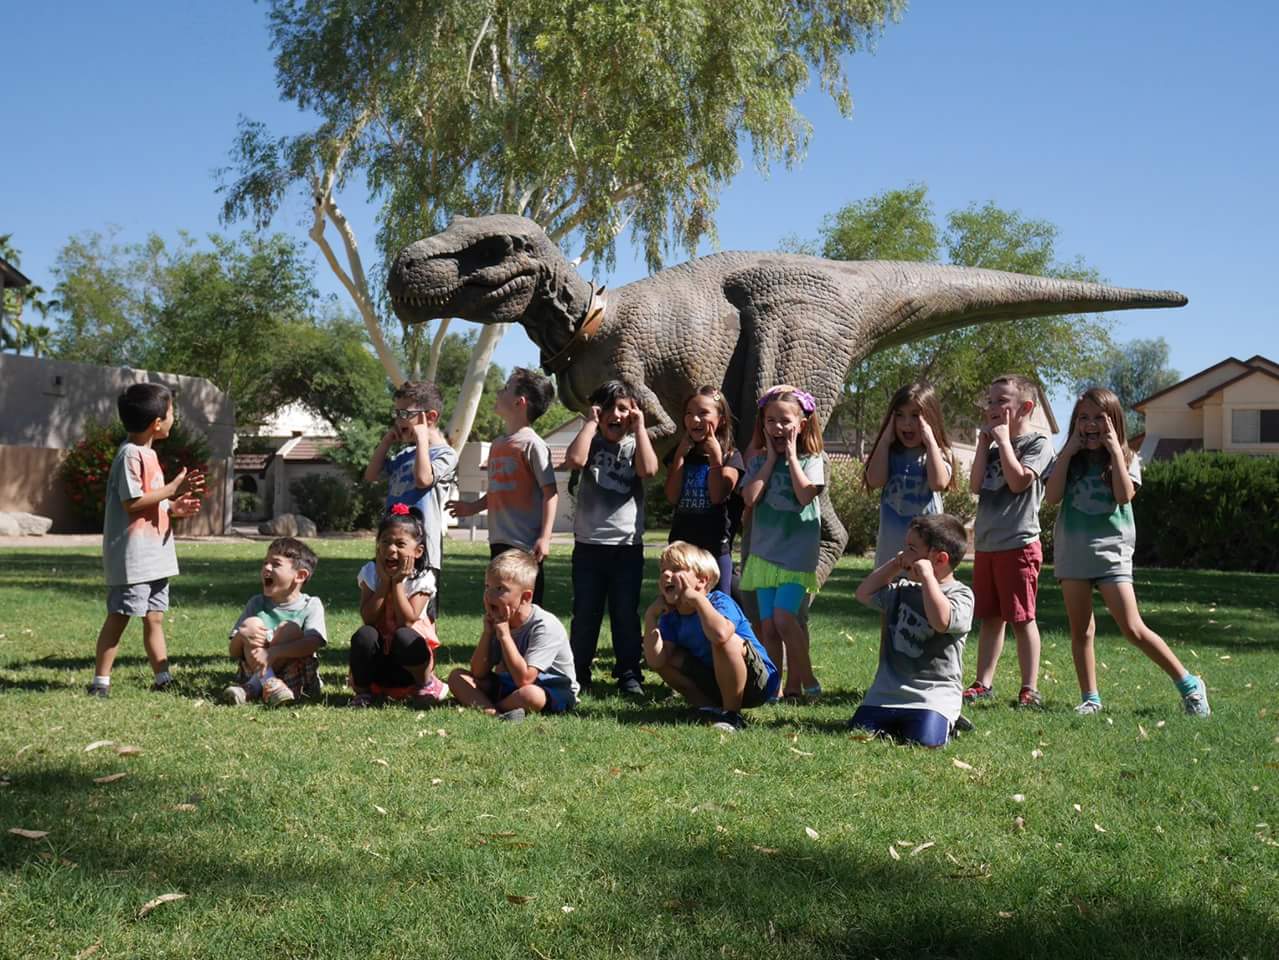 kids standing in front of a lifesize animatronic dinosaur